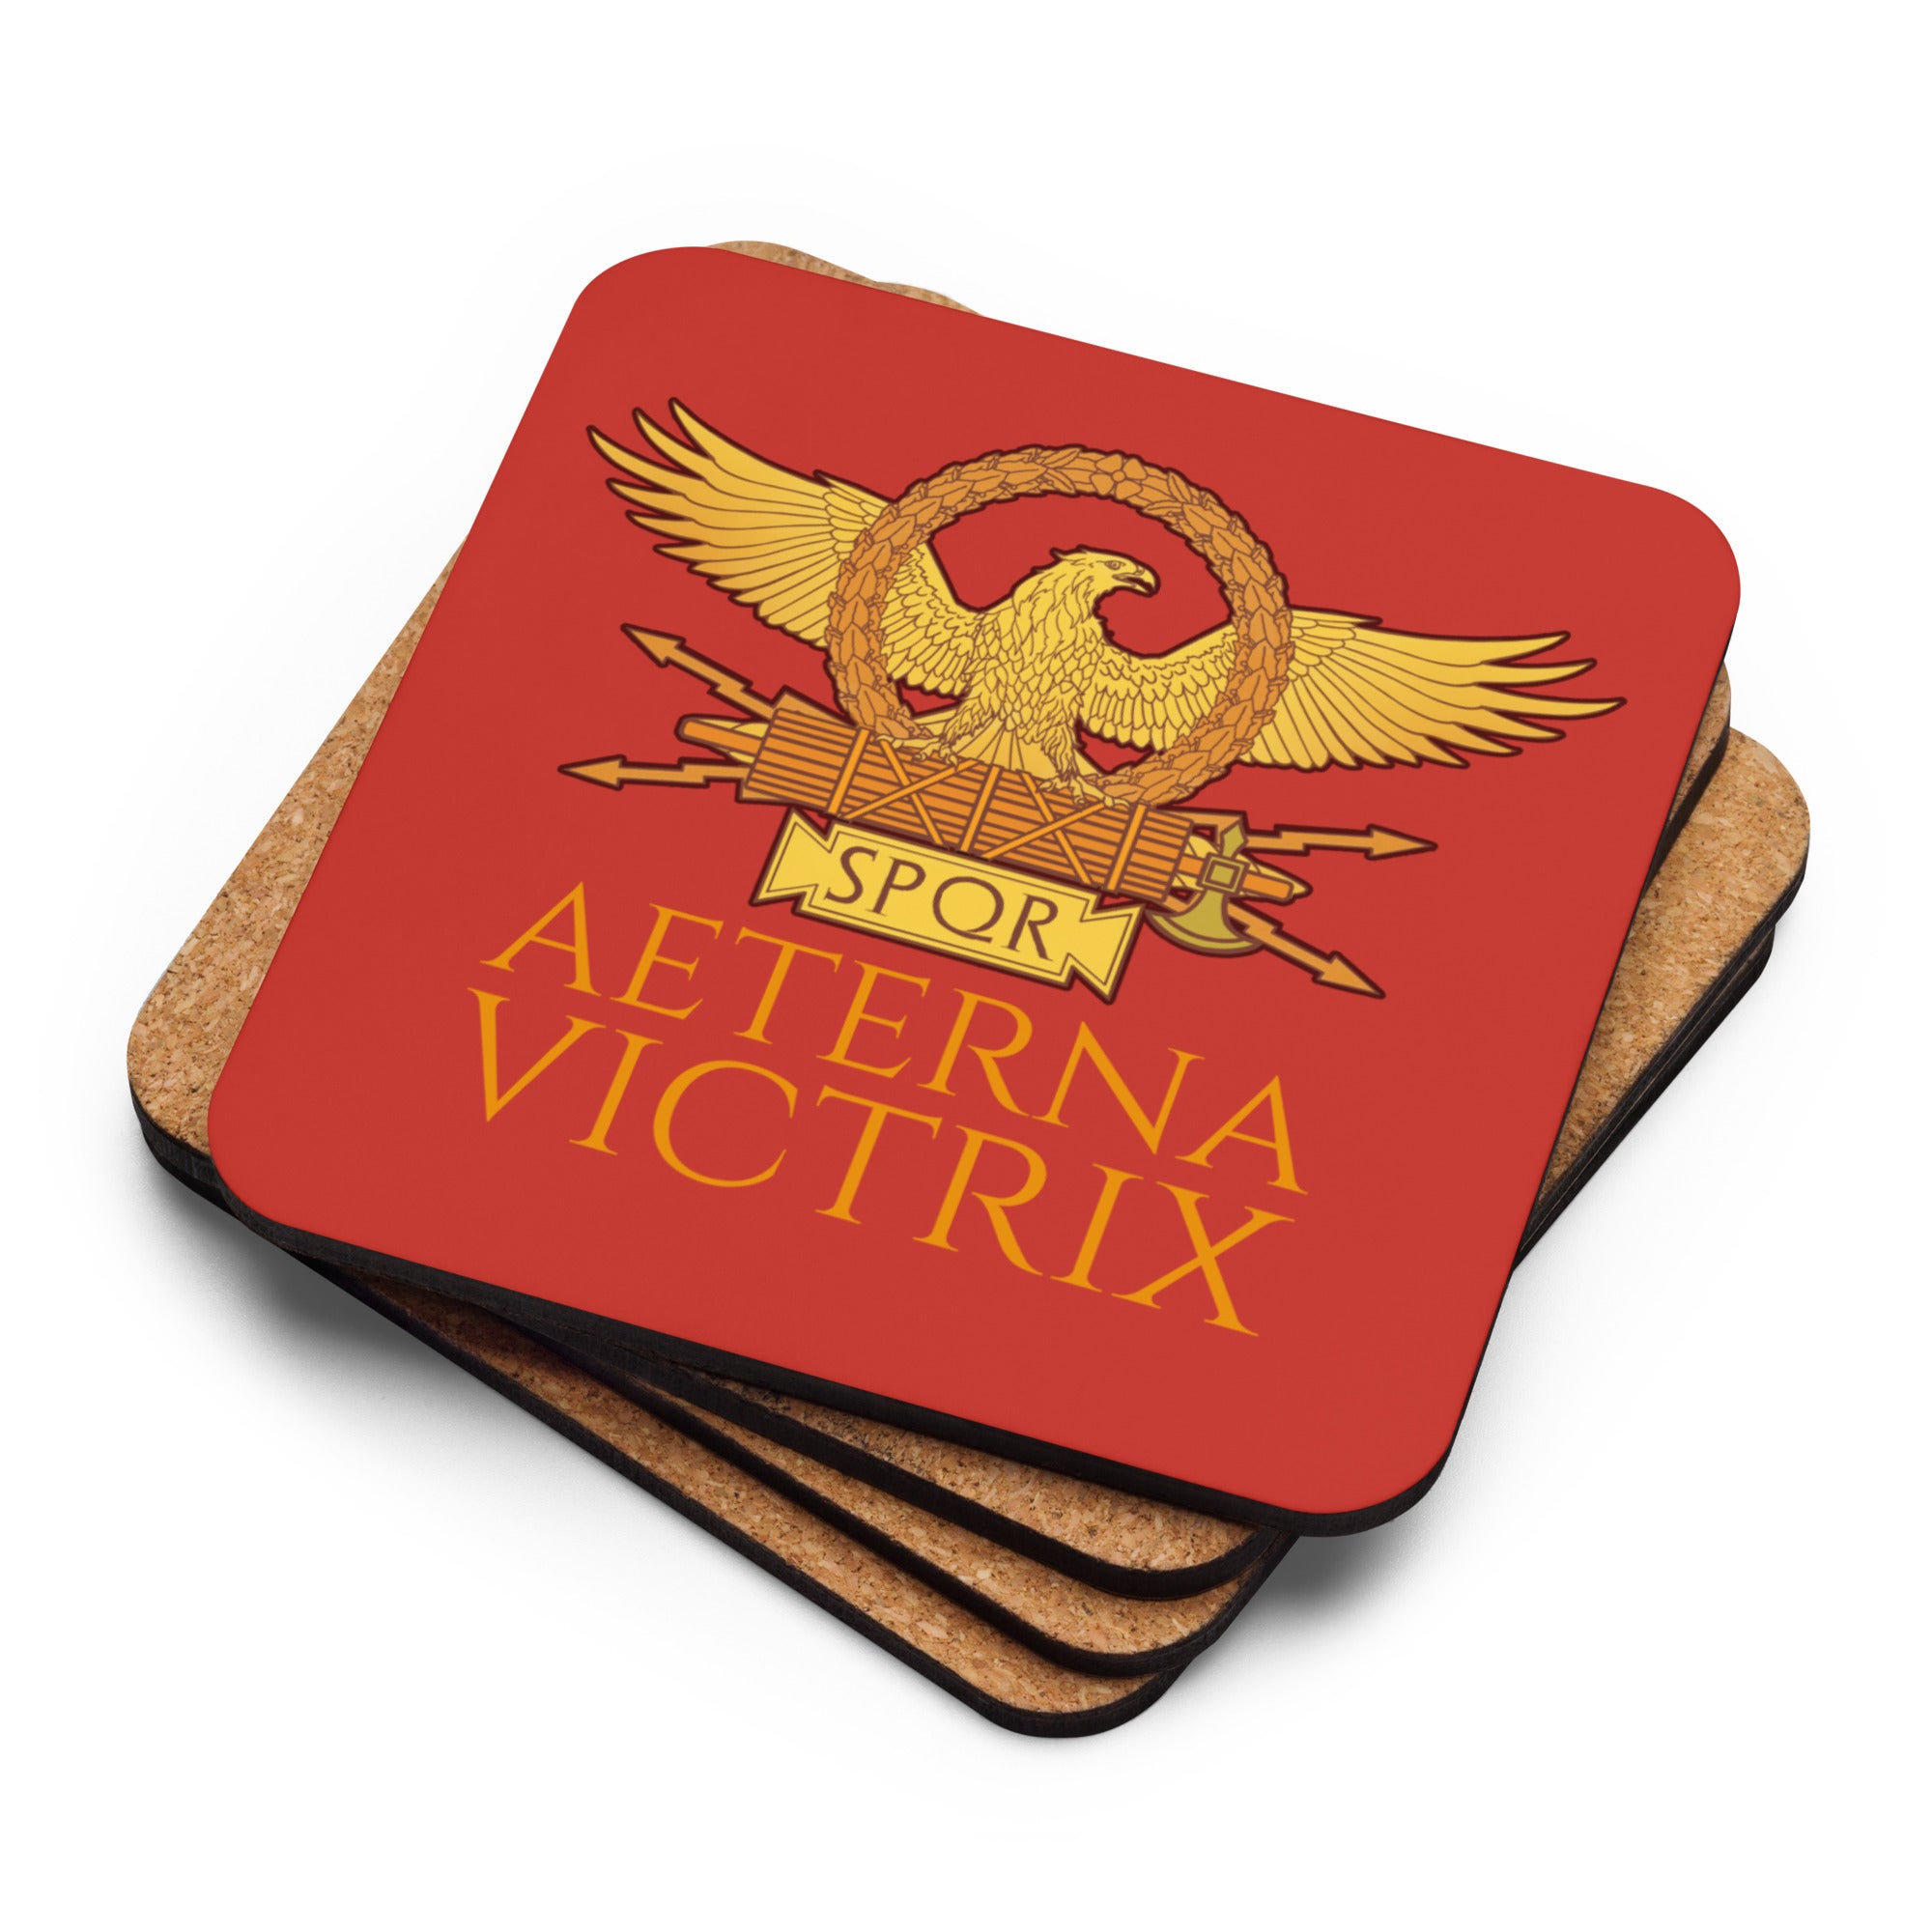 Aeterna Victrix - Eternal Victory - Ancient Rome Cork-Back Coaster (Red)